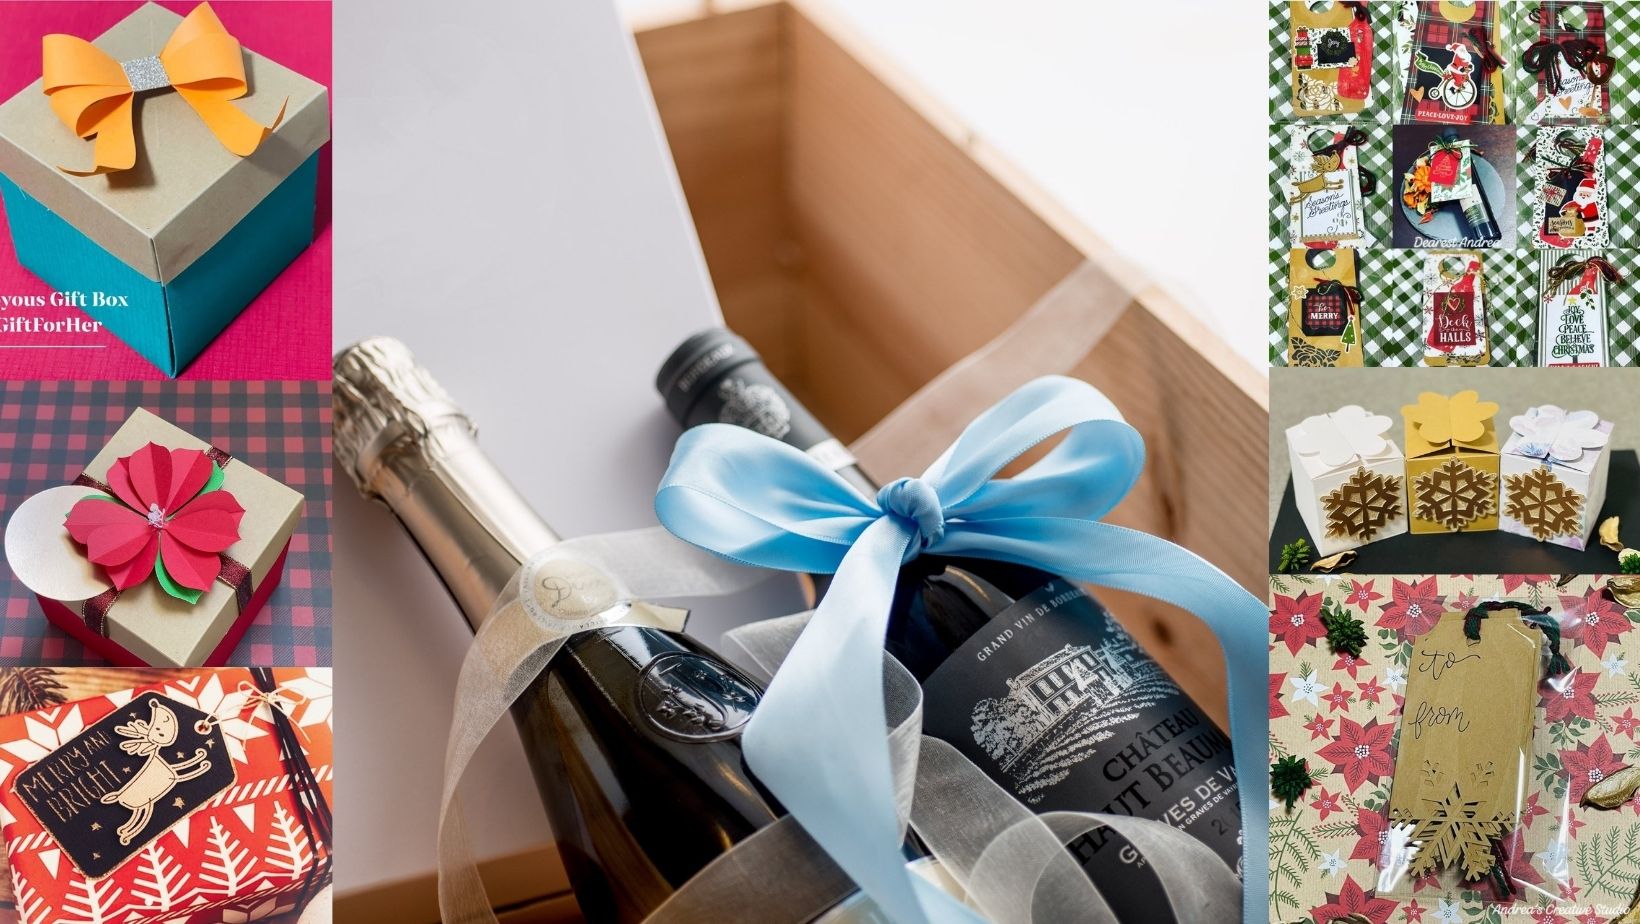 Give Your Friends, Business Associates and Loved Ones A Wine Gift